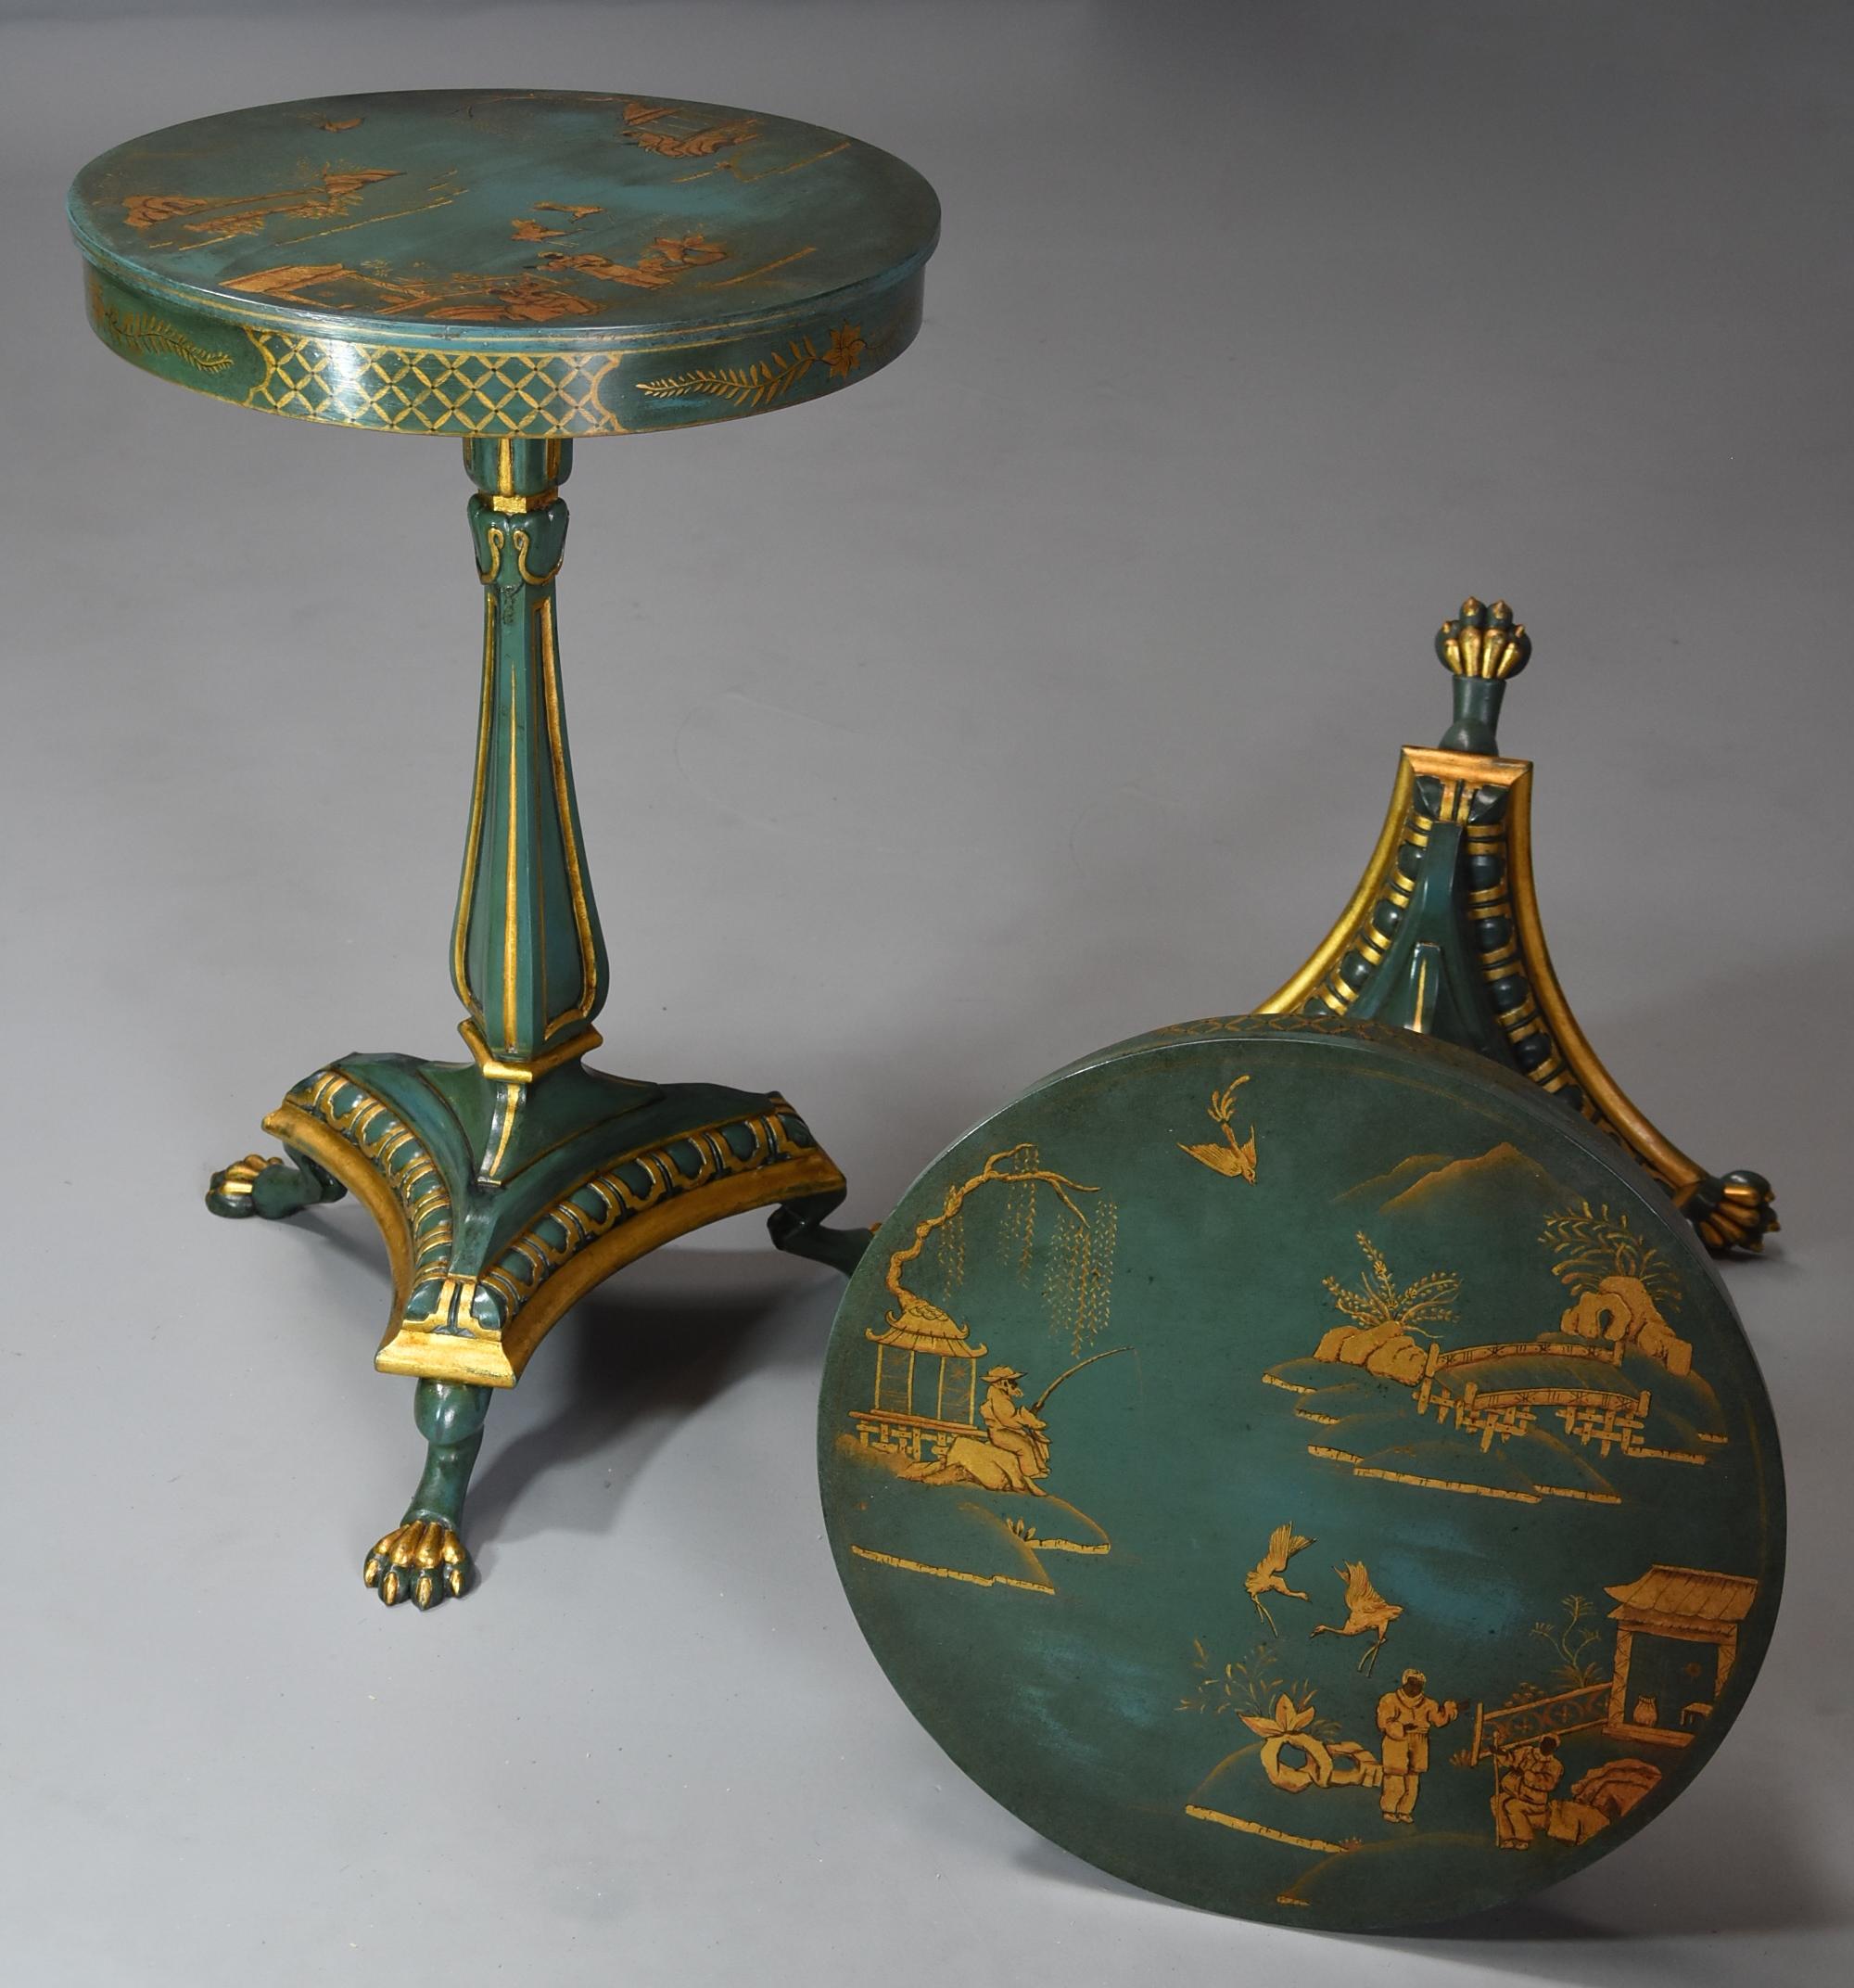 A pair of highly decorative early 20th century lacquered occasional tables in the Regency style and in the manner of Thomas Hope.

This pair of tables consist of lacquered tops with a blue/green ground and gilt decoration depicting a traditional